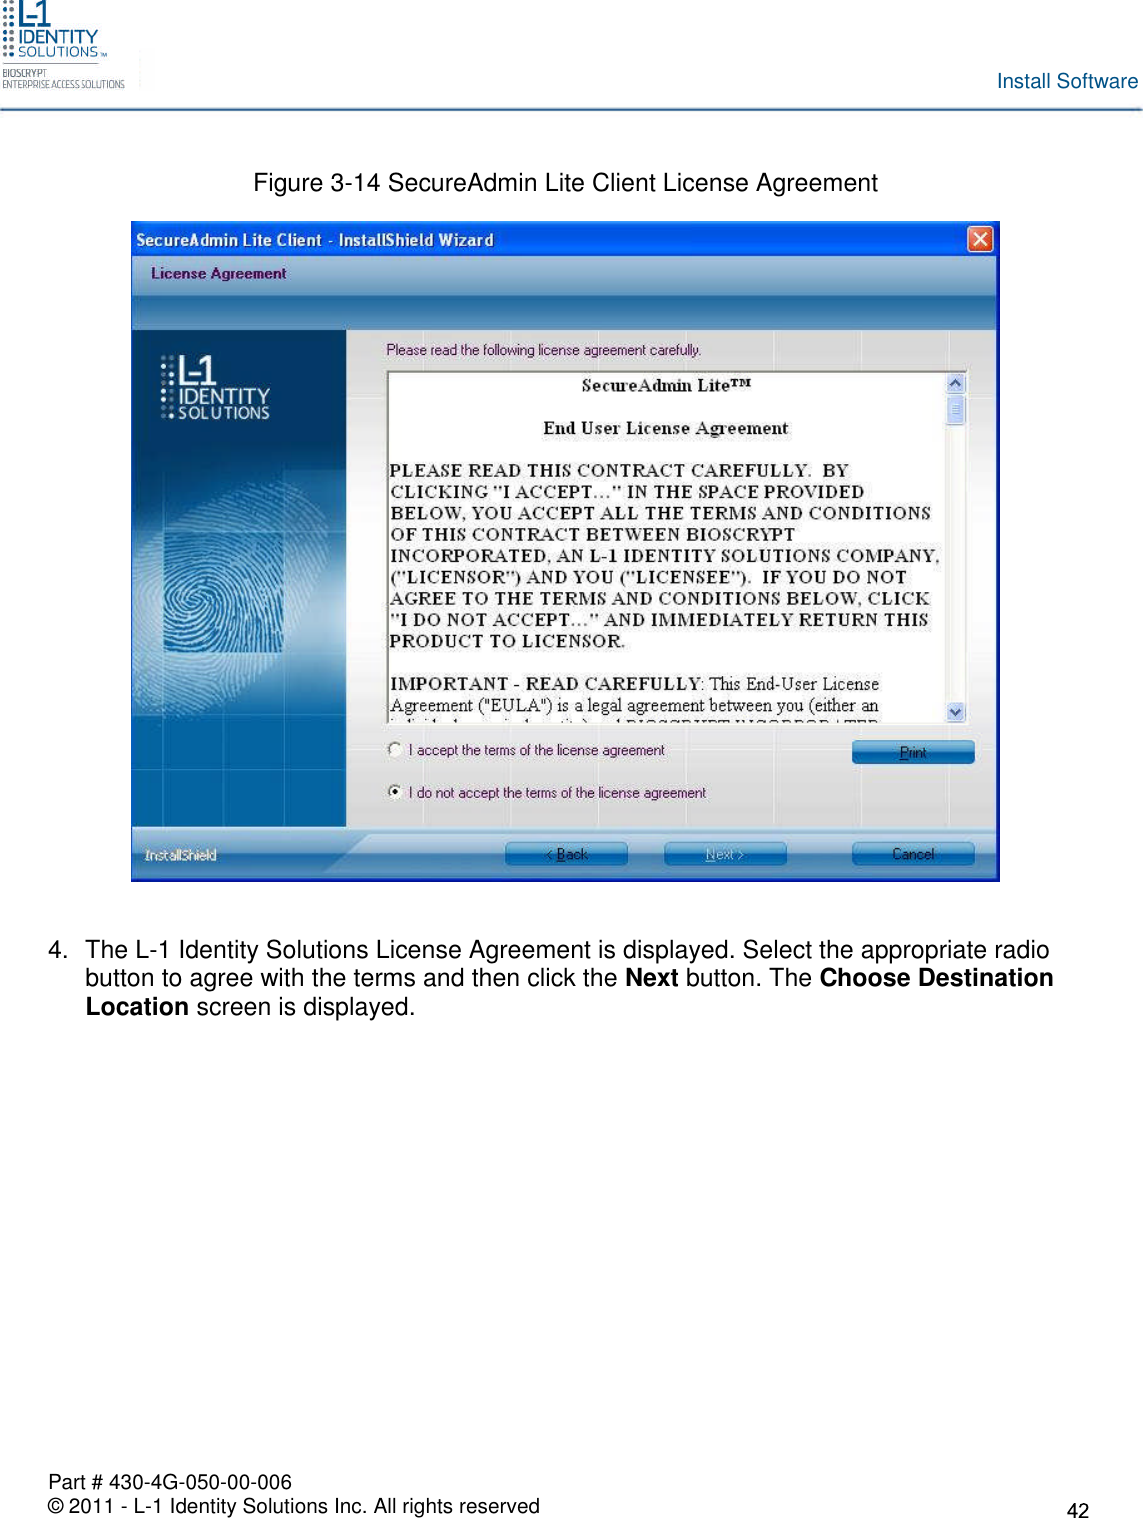 Part # 430-4G-050-00-006© 2011 - L-1 Identity Solutions Inc. All rights reservedInstall SoftwareFigure 3-14 SecureAdmin Lite Client License Agreement4. The L-1 Identity Solutions License Agreement is displayed. Select the appropriate radiobutton to agree with the terms and then click the Next button. The Choose DestinationLocation screen is displayed.